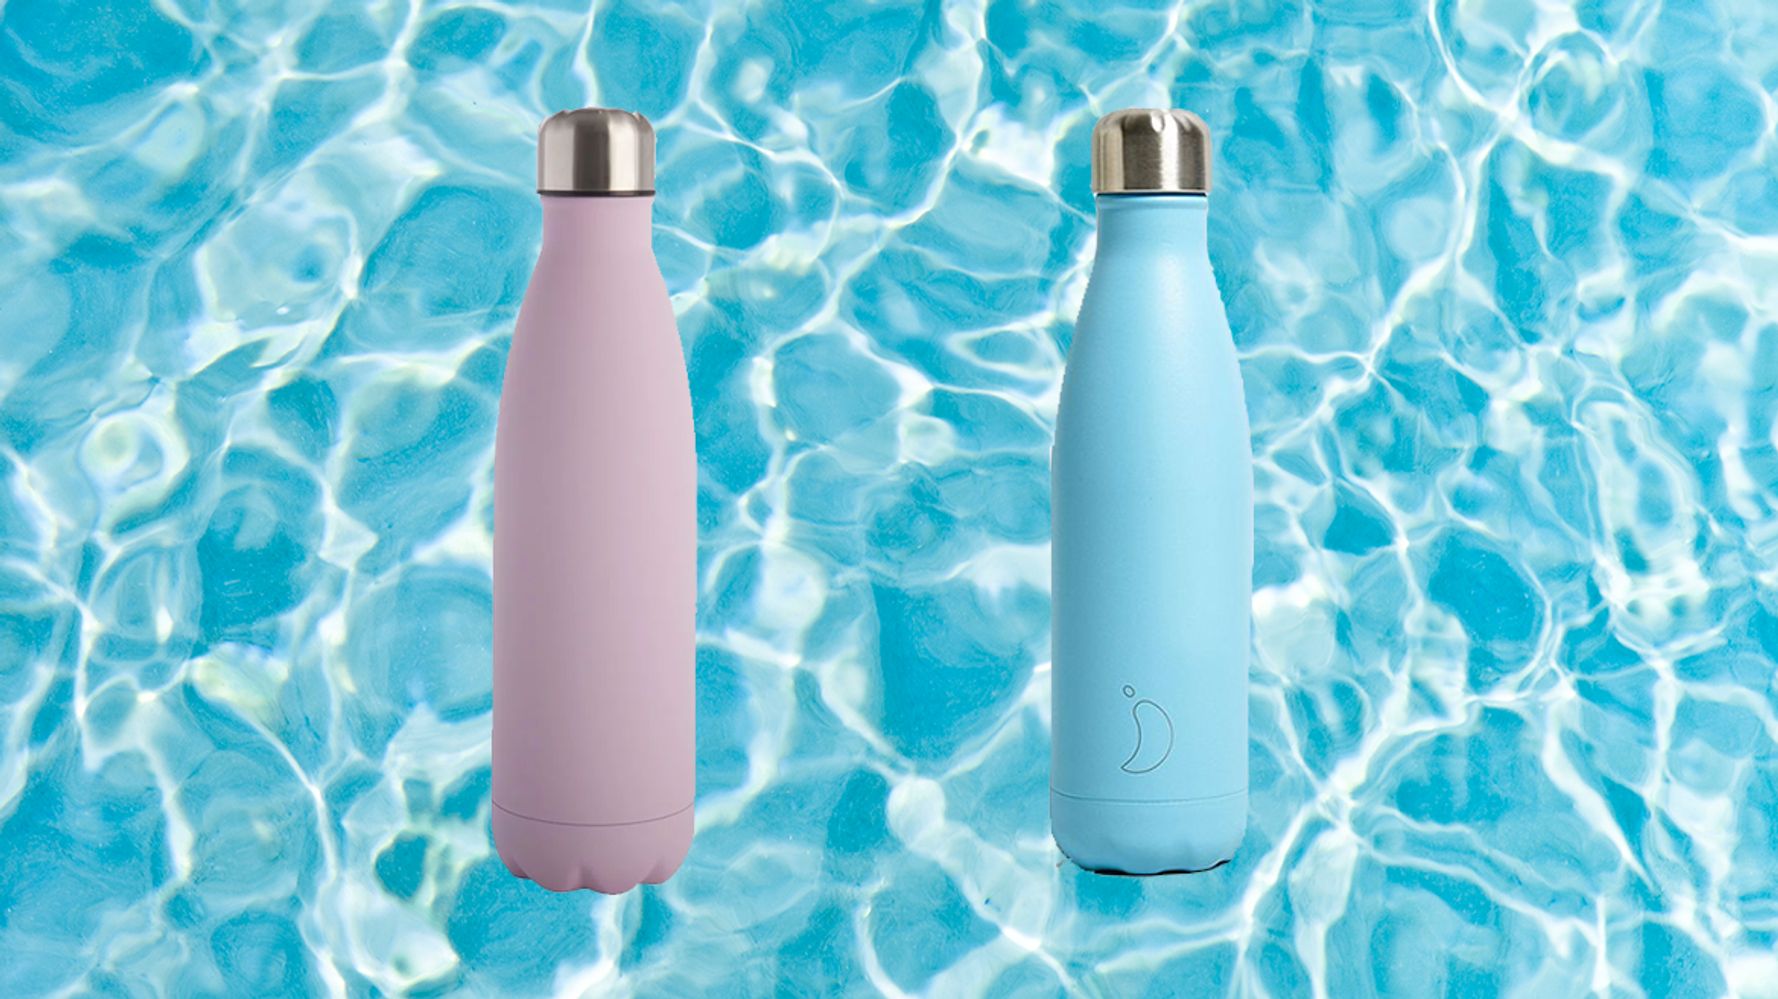 Honest Review: Reusable 'Chilly Bottle' Water bottle- Is it worth